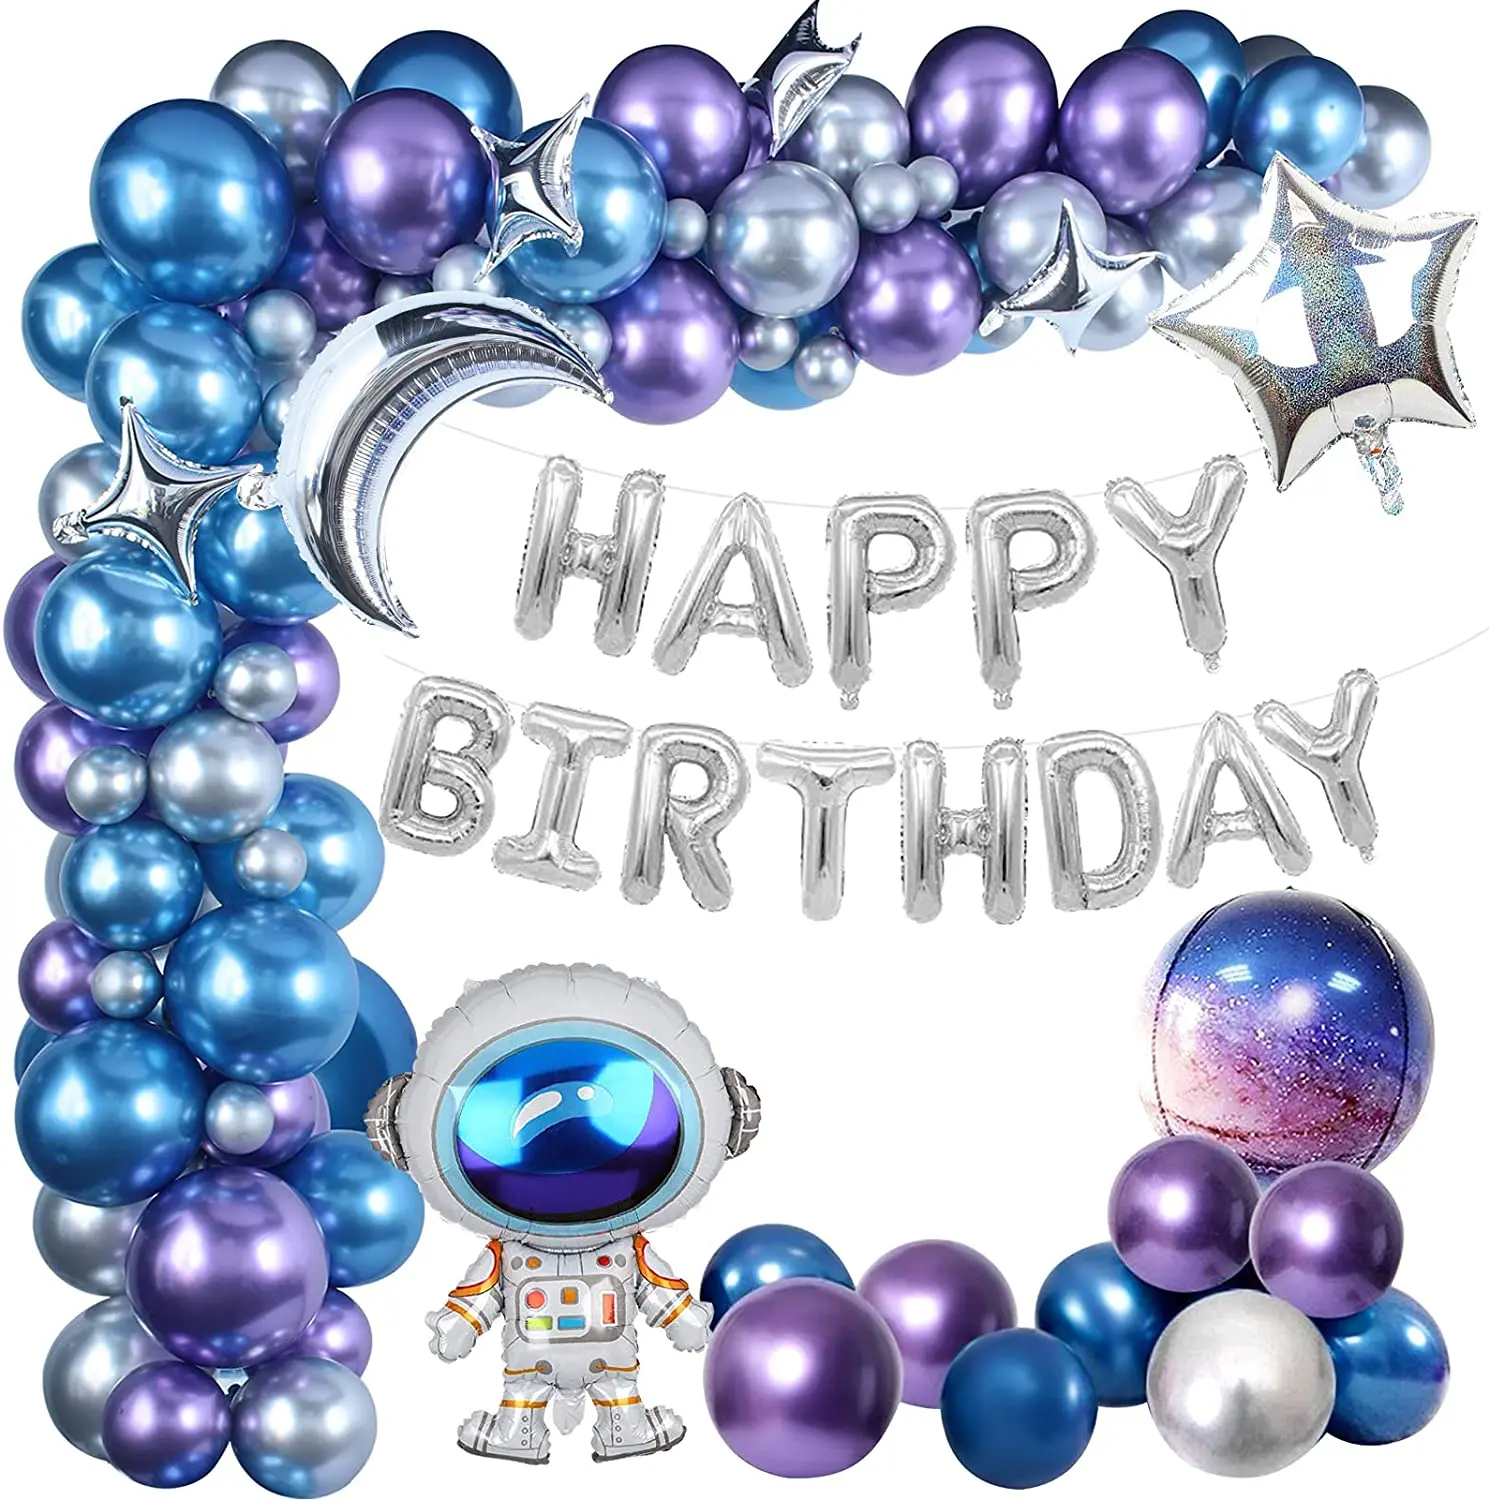 

Kids Birthday Decoration Outer Space Balloons Garland Kit Universe Space Planets Ballon Included UFO Rocket Astronaut Balloon